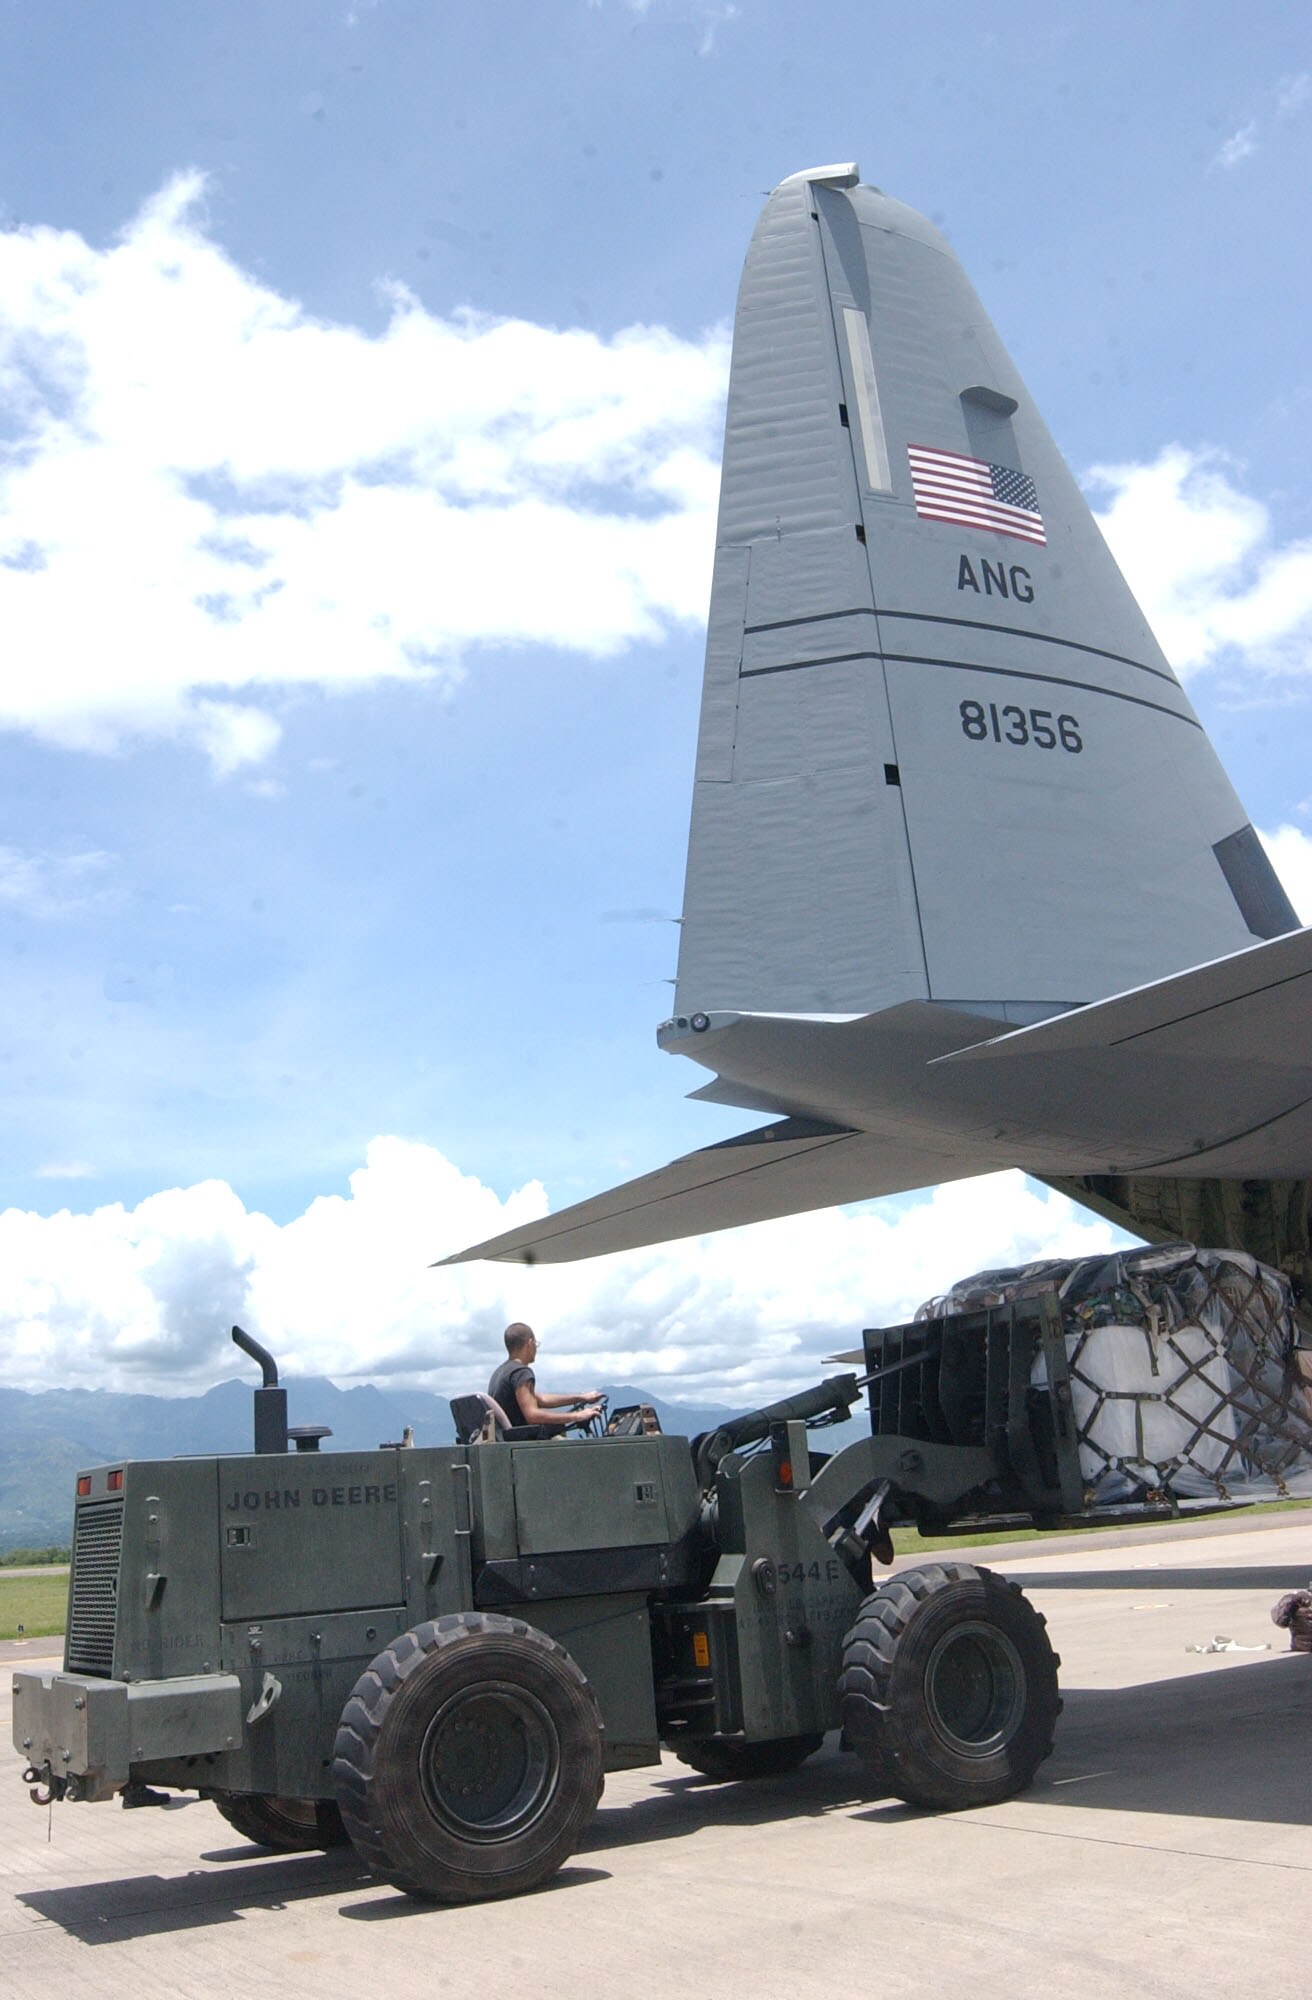 SOTO CANO AIR BASE, Honduras – Senior Airman Kenneth Cumbie, 612th Air Base Squadron here, drives a forklift to load medical supplies onto a C-130J from the Maryland Air National Guard. Approximately 30 Soldiers and Airmen are responding to the Aug. 15 earthquake in Peru and are taking with them 4,470 pounds of medical supplies for relief efforts.  (US Air Force photo by Tech. Sgt. Sonny Cohrs)